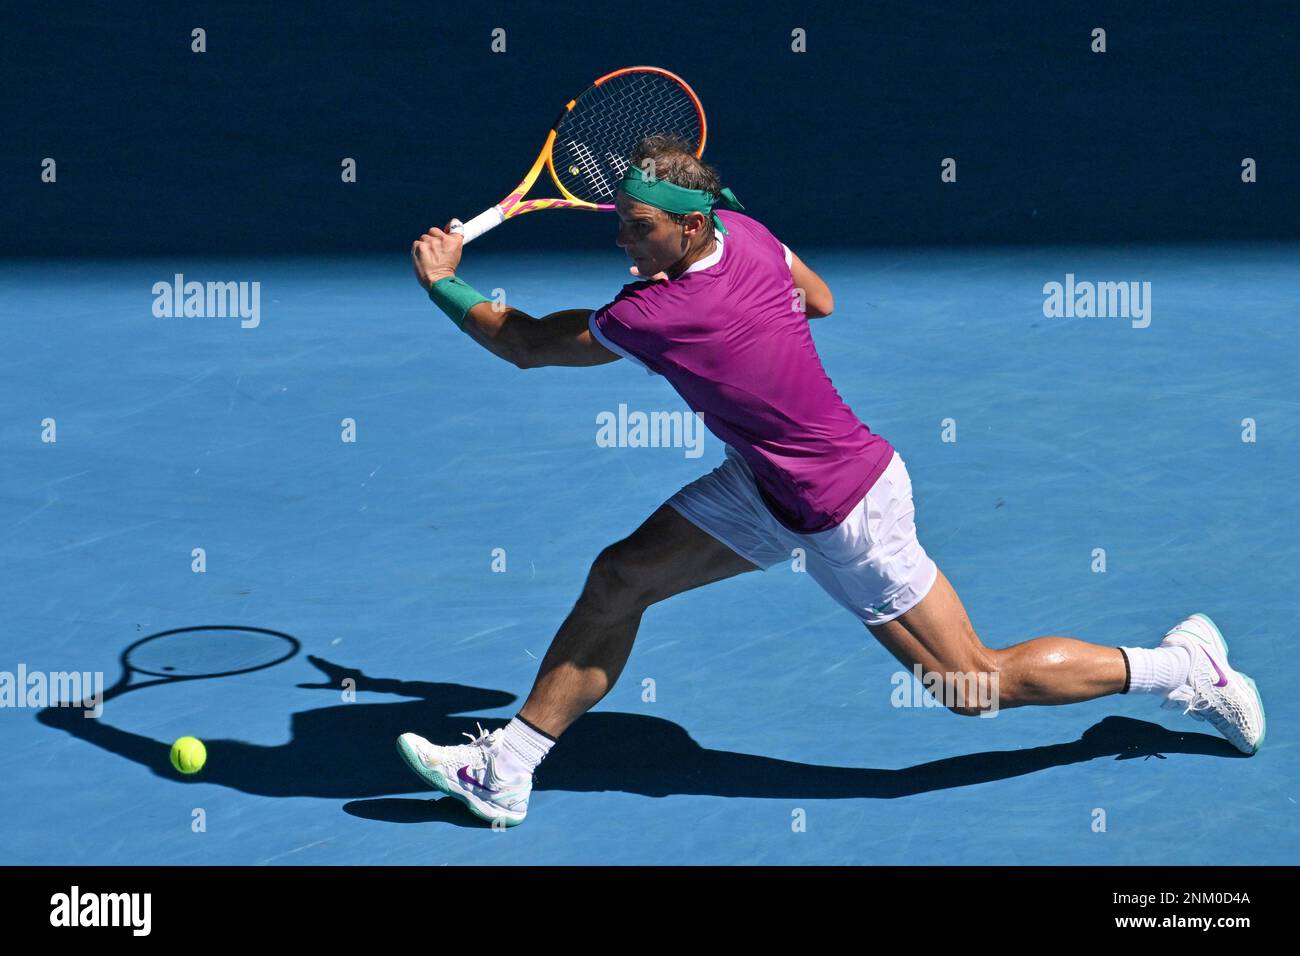 January 26, 2022 6th seed RAFAEL NADAL (ESP) in action against 14th seed DENIS SHAPOVALOV (CAN) on Margaret Court Arena in a Mens Singles Quarterfinals match on day 9 of the 2022